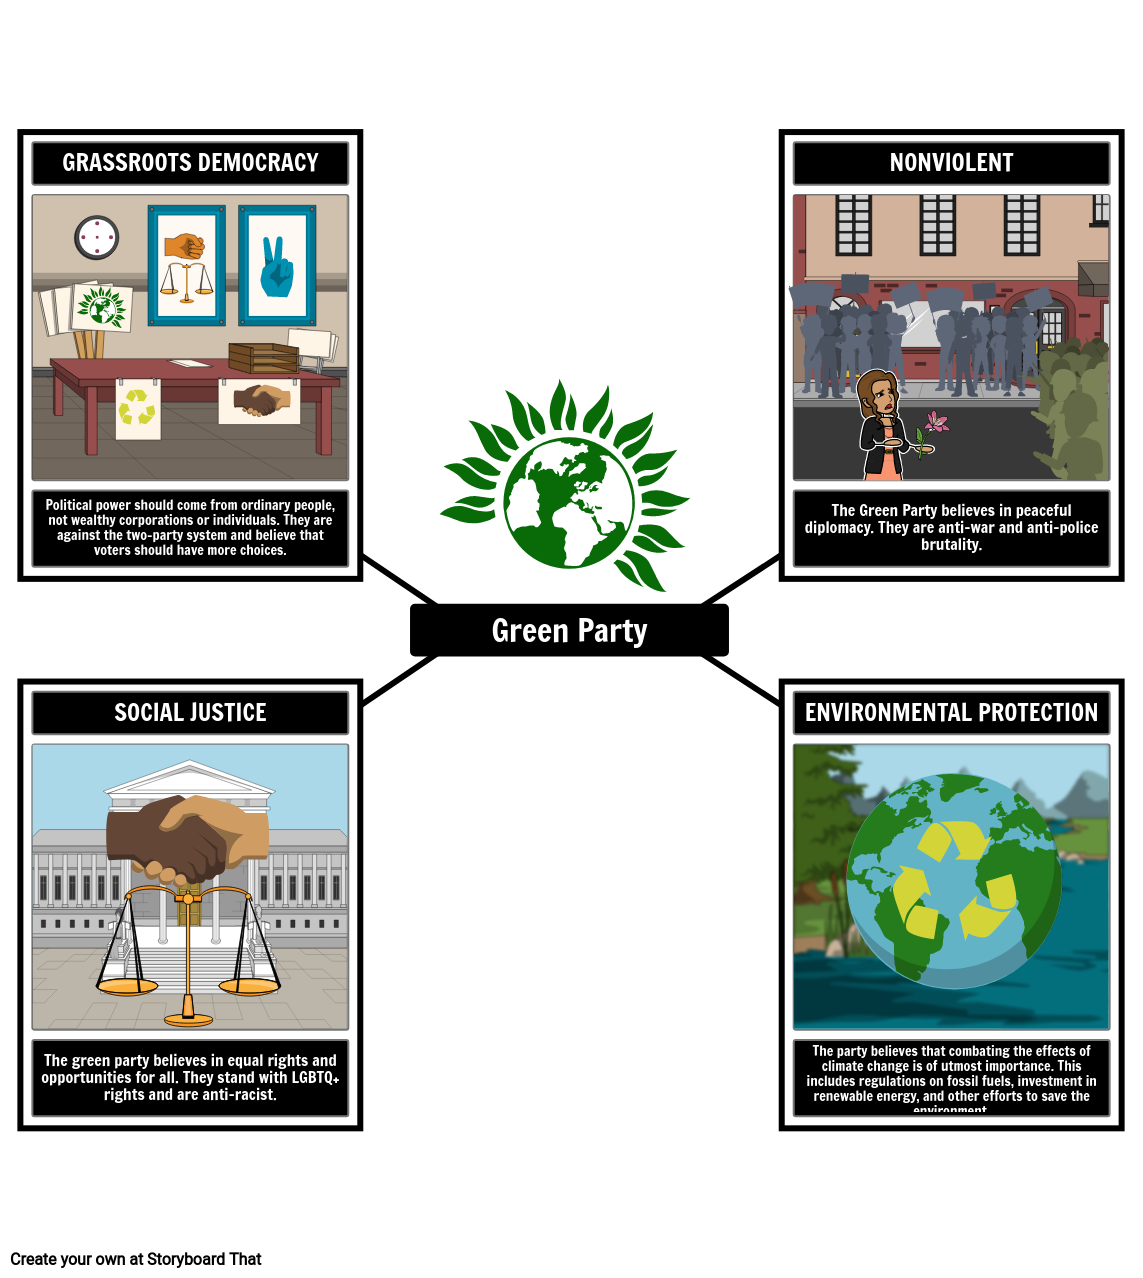 Elections: The Green Party